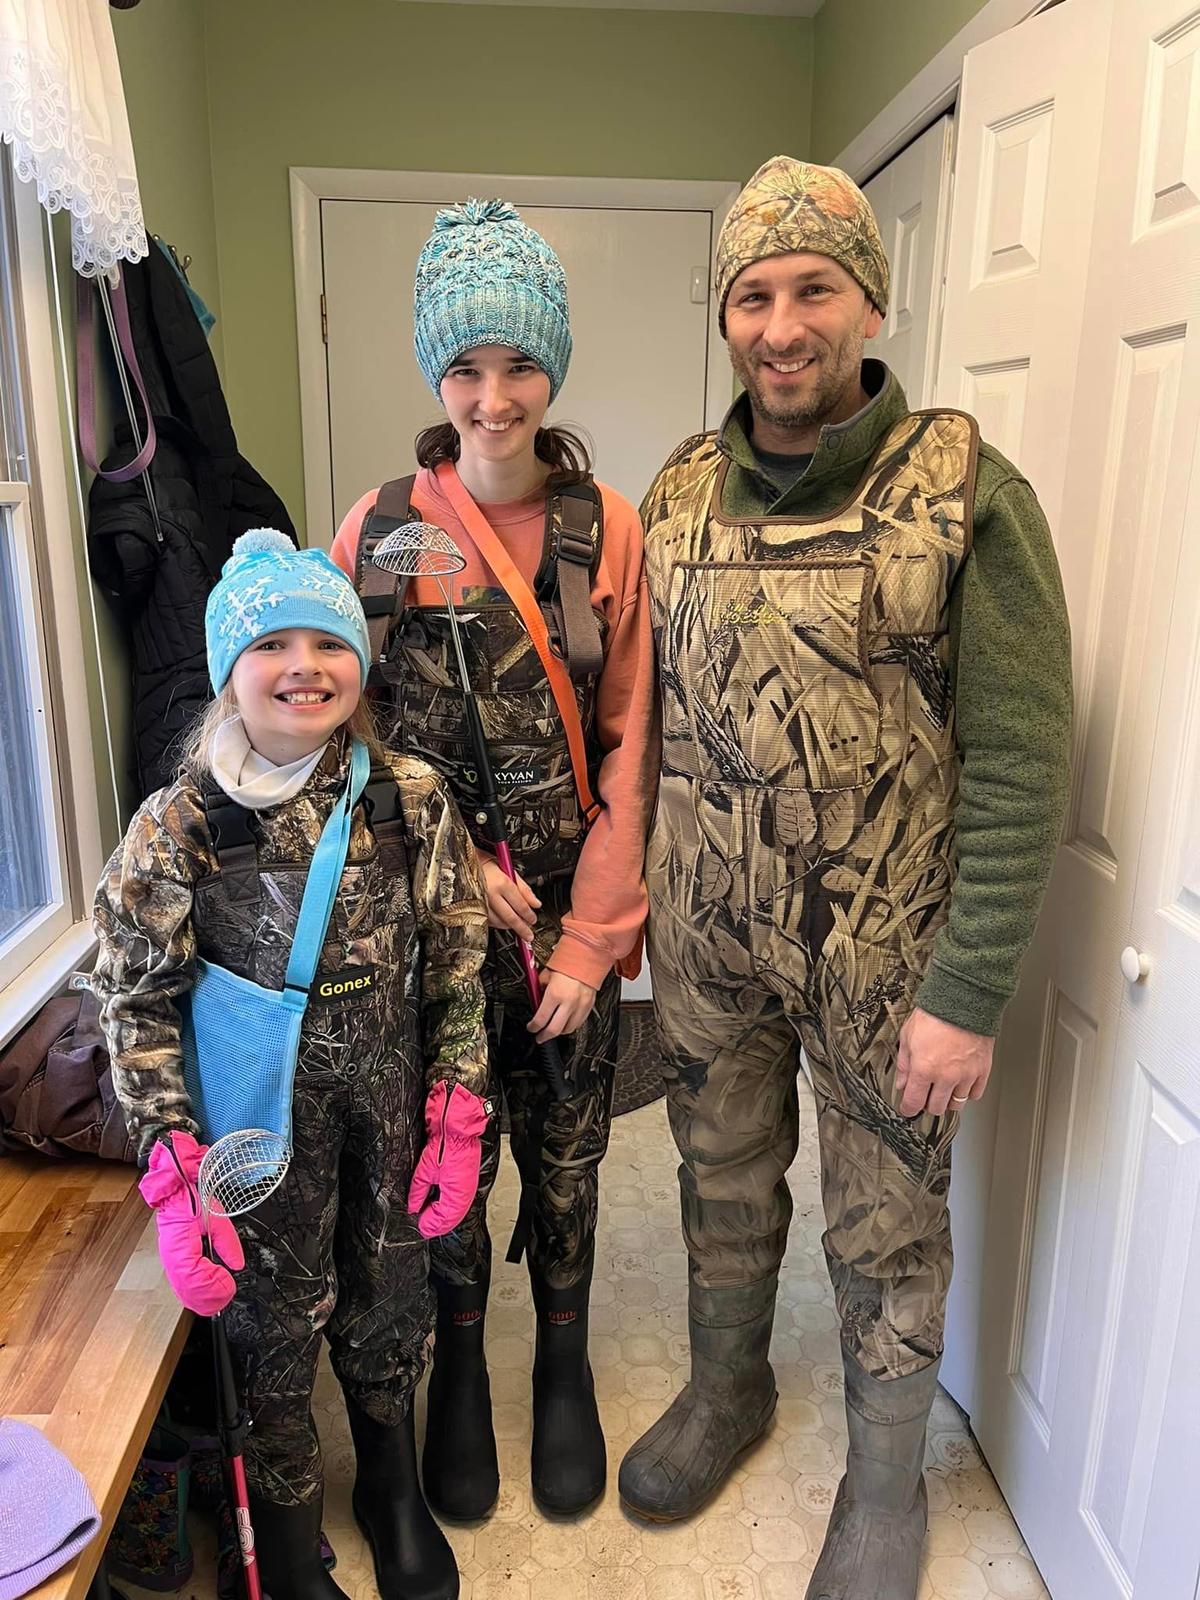 Molly with her older sister Natalie and father, Bruce. (Courtesy of <a href="https://www.instagram.com/fossilgirls_md/">@fossilgirls_md</a> and <a href="https://www.instagram.com/fossilgirls_md/">www.thefossilgirls.com</a>)